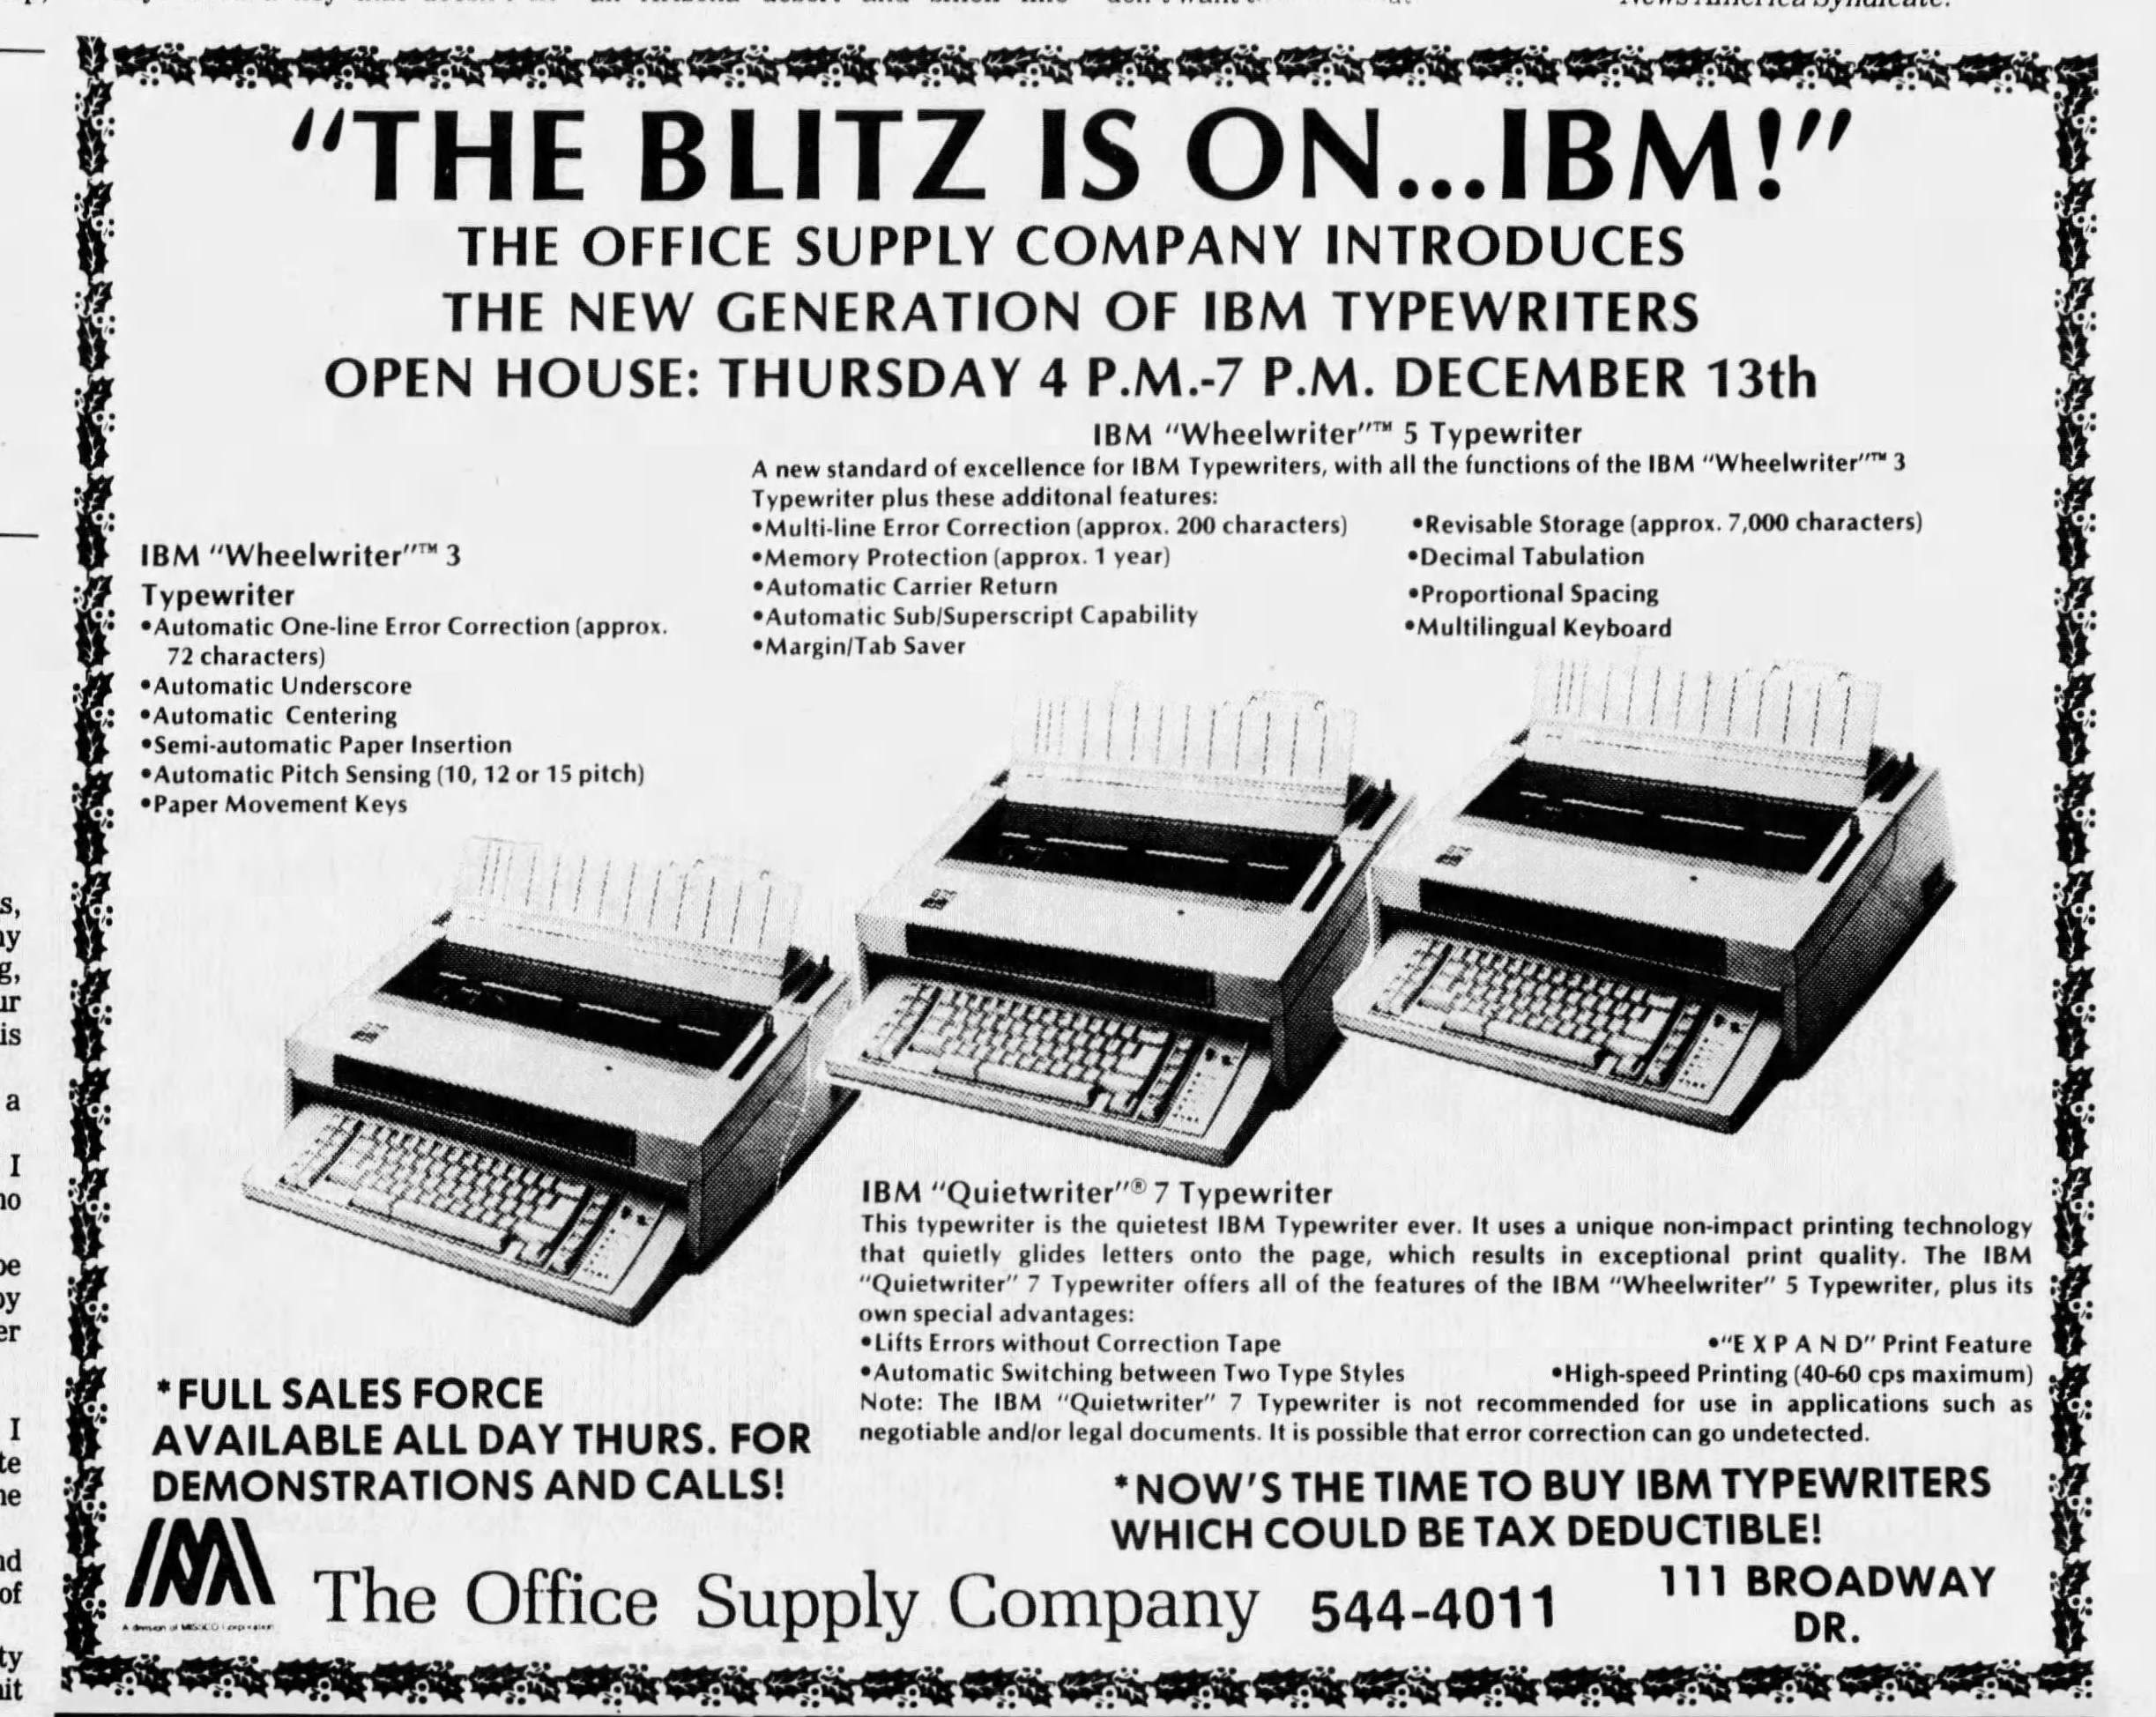 1984 Hattiesburg American advert showing<br />the first Wheelwriters and Quietwriter<a class='source-link' href='/wiki?id=modelm#Sources'><sup>[2]</sup></a>